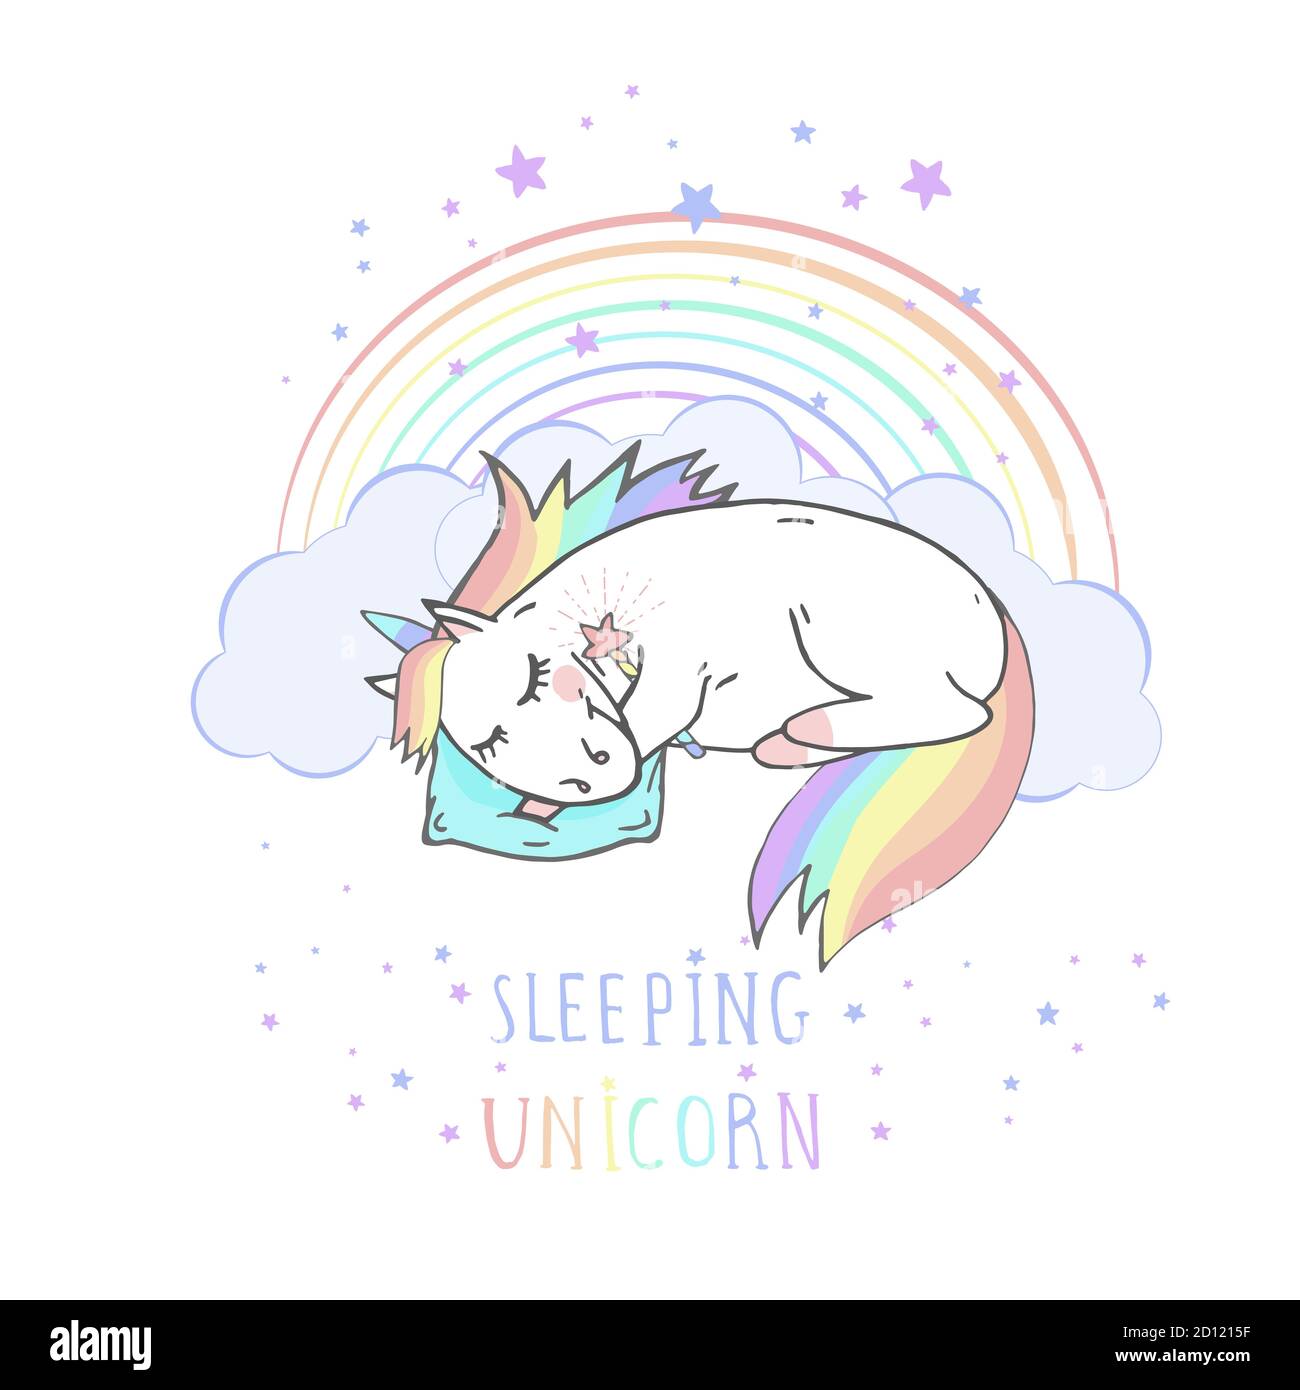 Vector illustration of hand drawn sleeping unicorn with stars and text - SLEEPING UNICORN on withe background. Cartoon style. Colored. Stock Vector